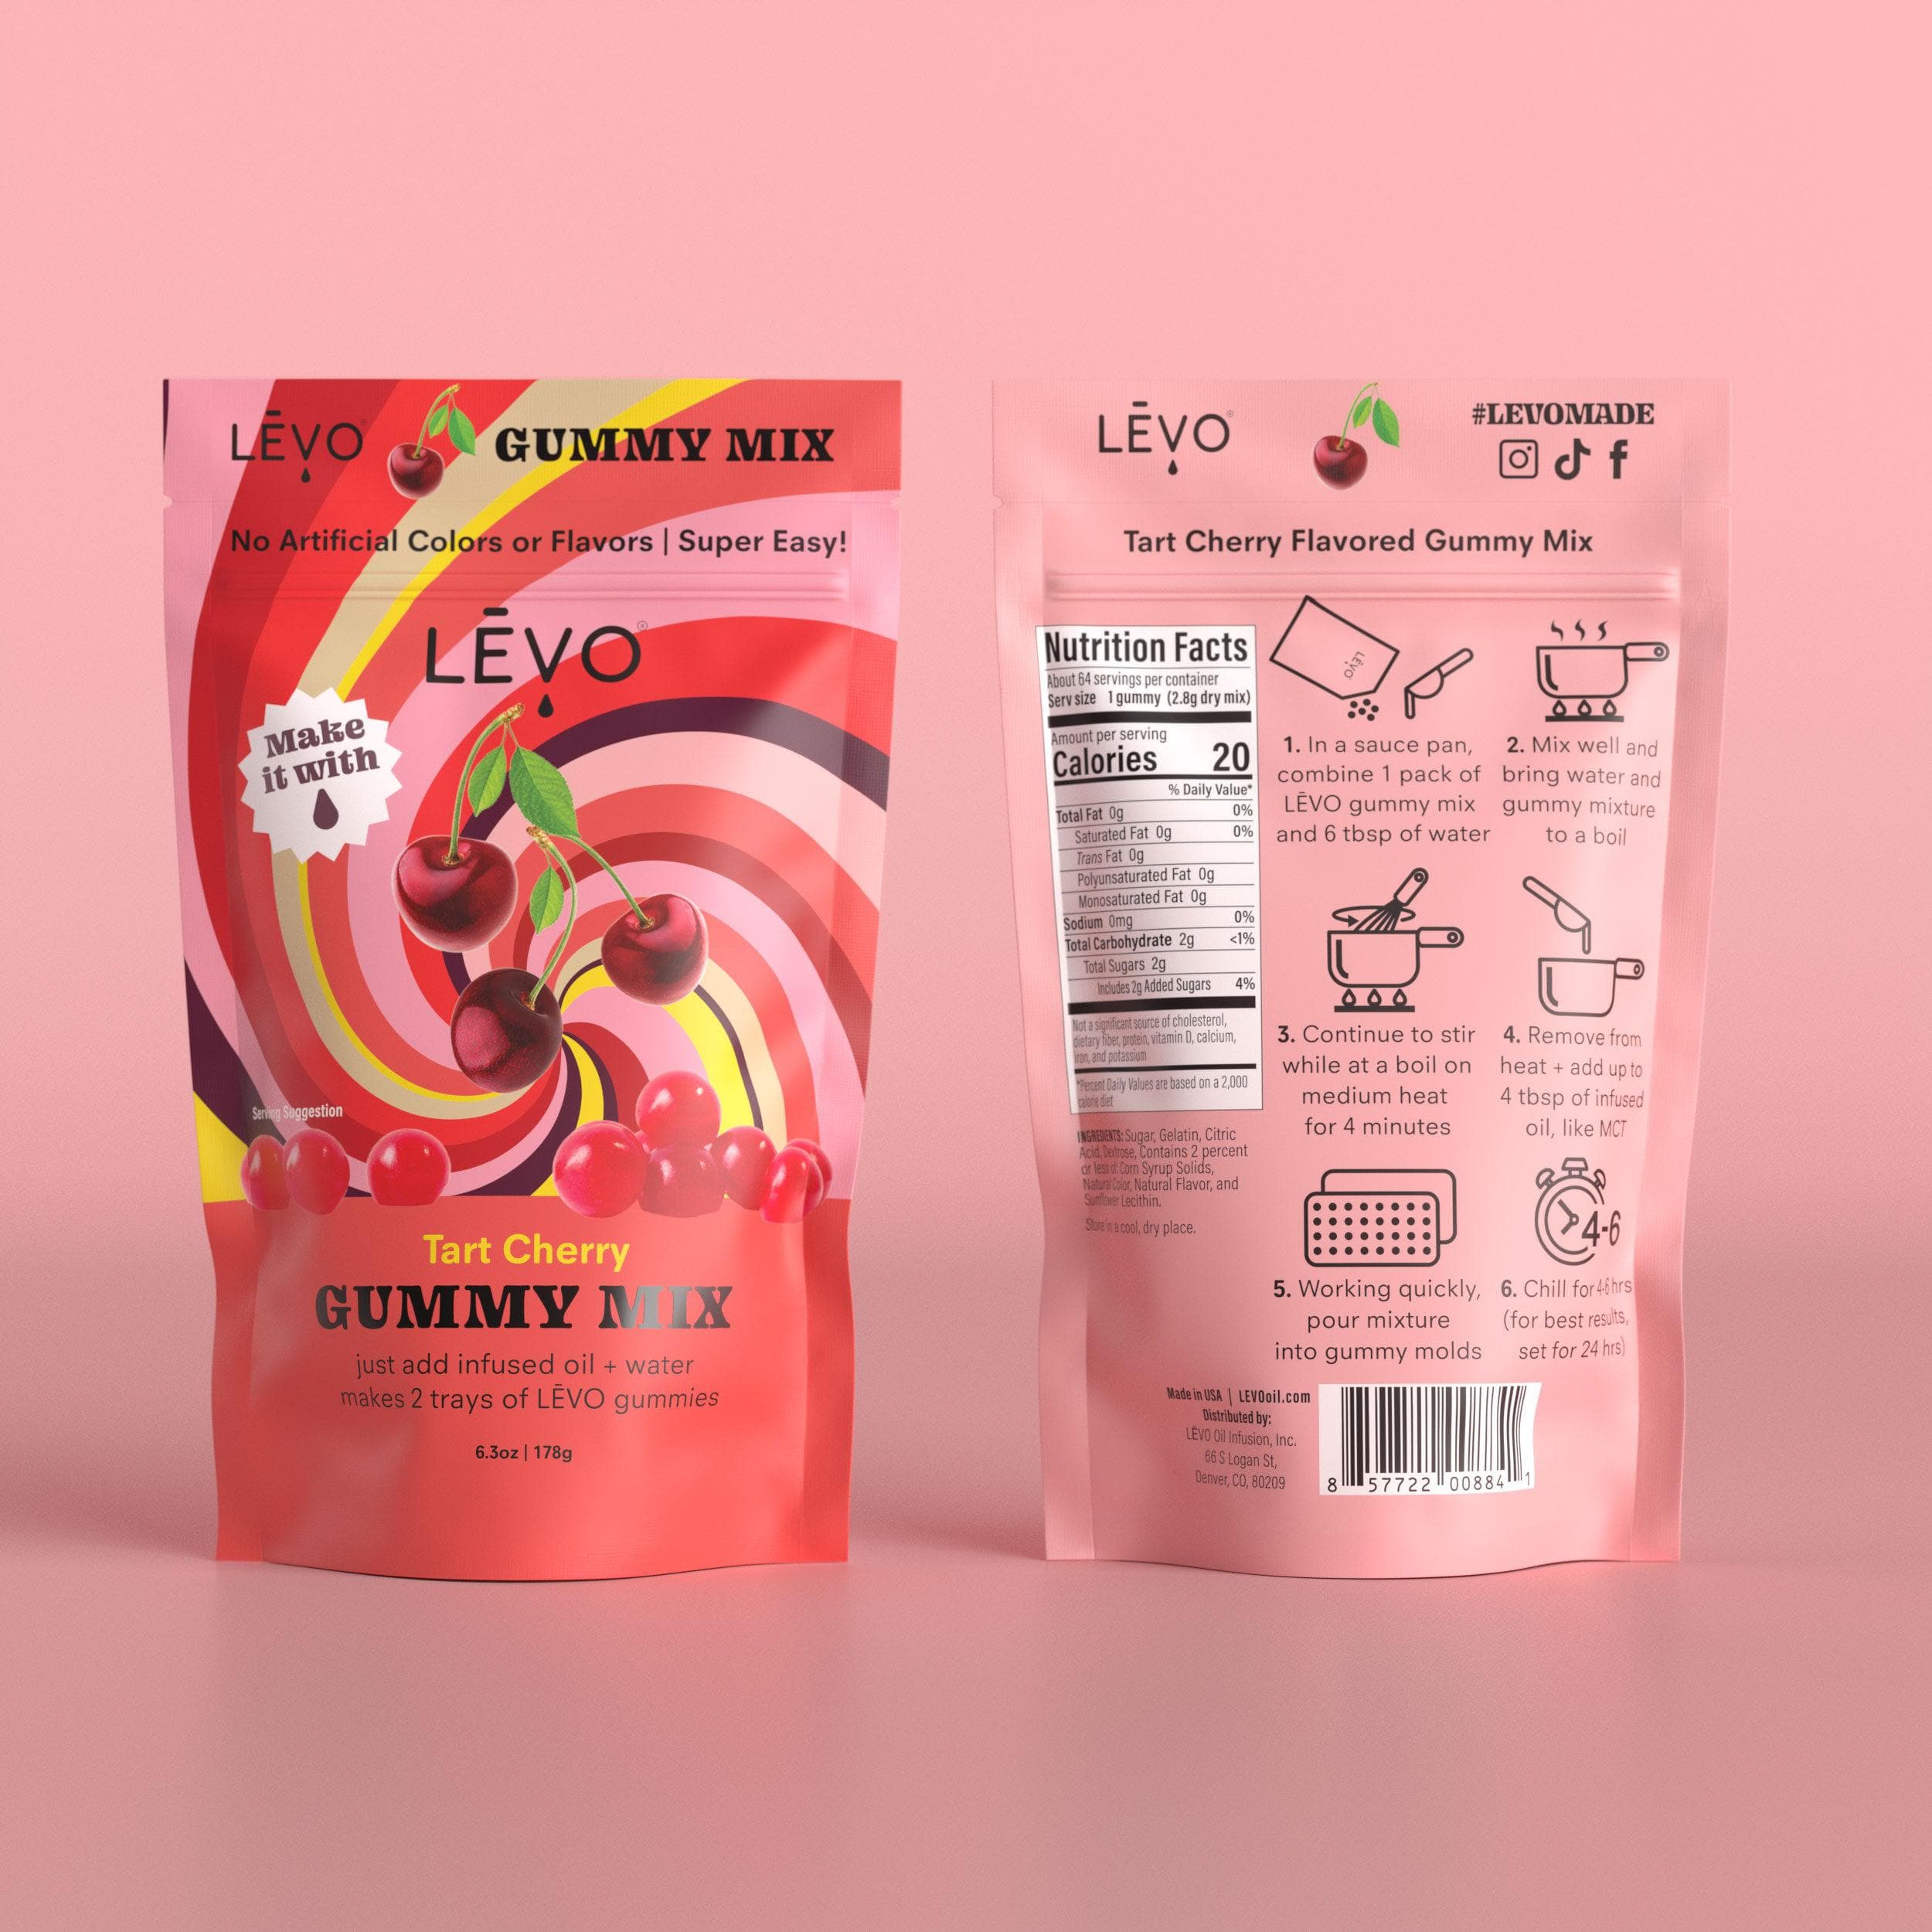 Tart Cherry LEVO gummy mix, made with all natural flavors and no artificial colors. Make your gummies pop with LEVO infused MCT or Coconut Oil. LEVOoil.com has everything you need to make your own infused gummies at home. Share your infused gummies with friends.